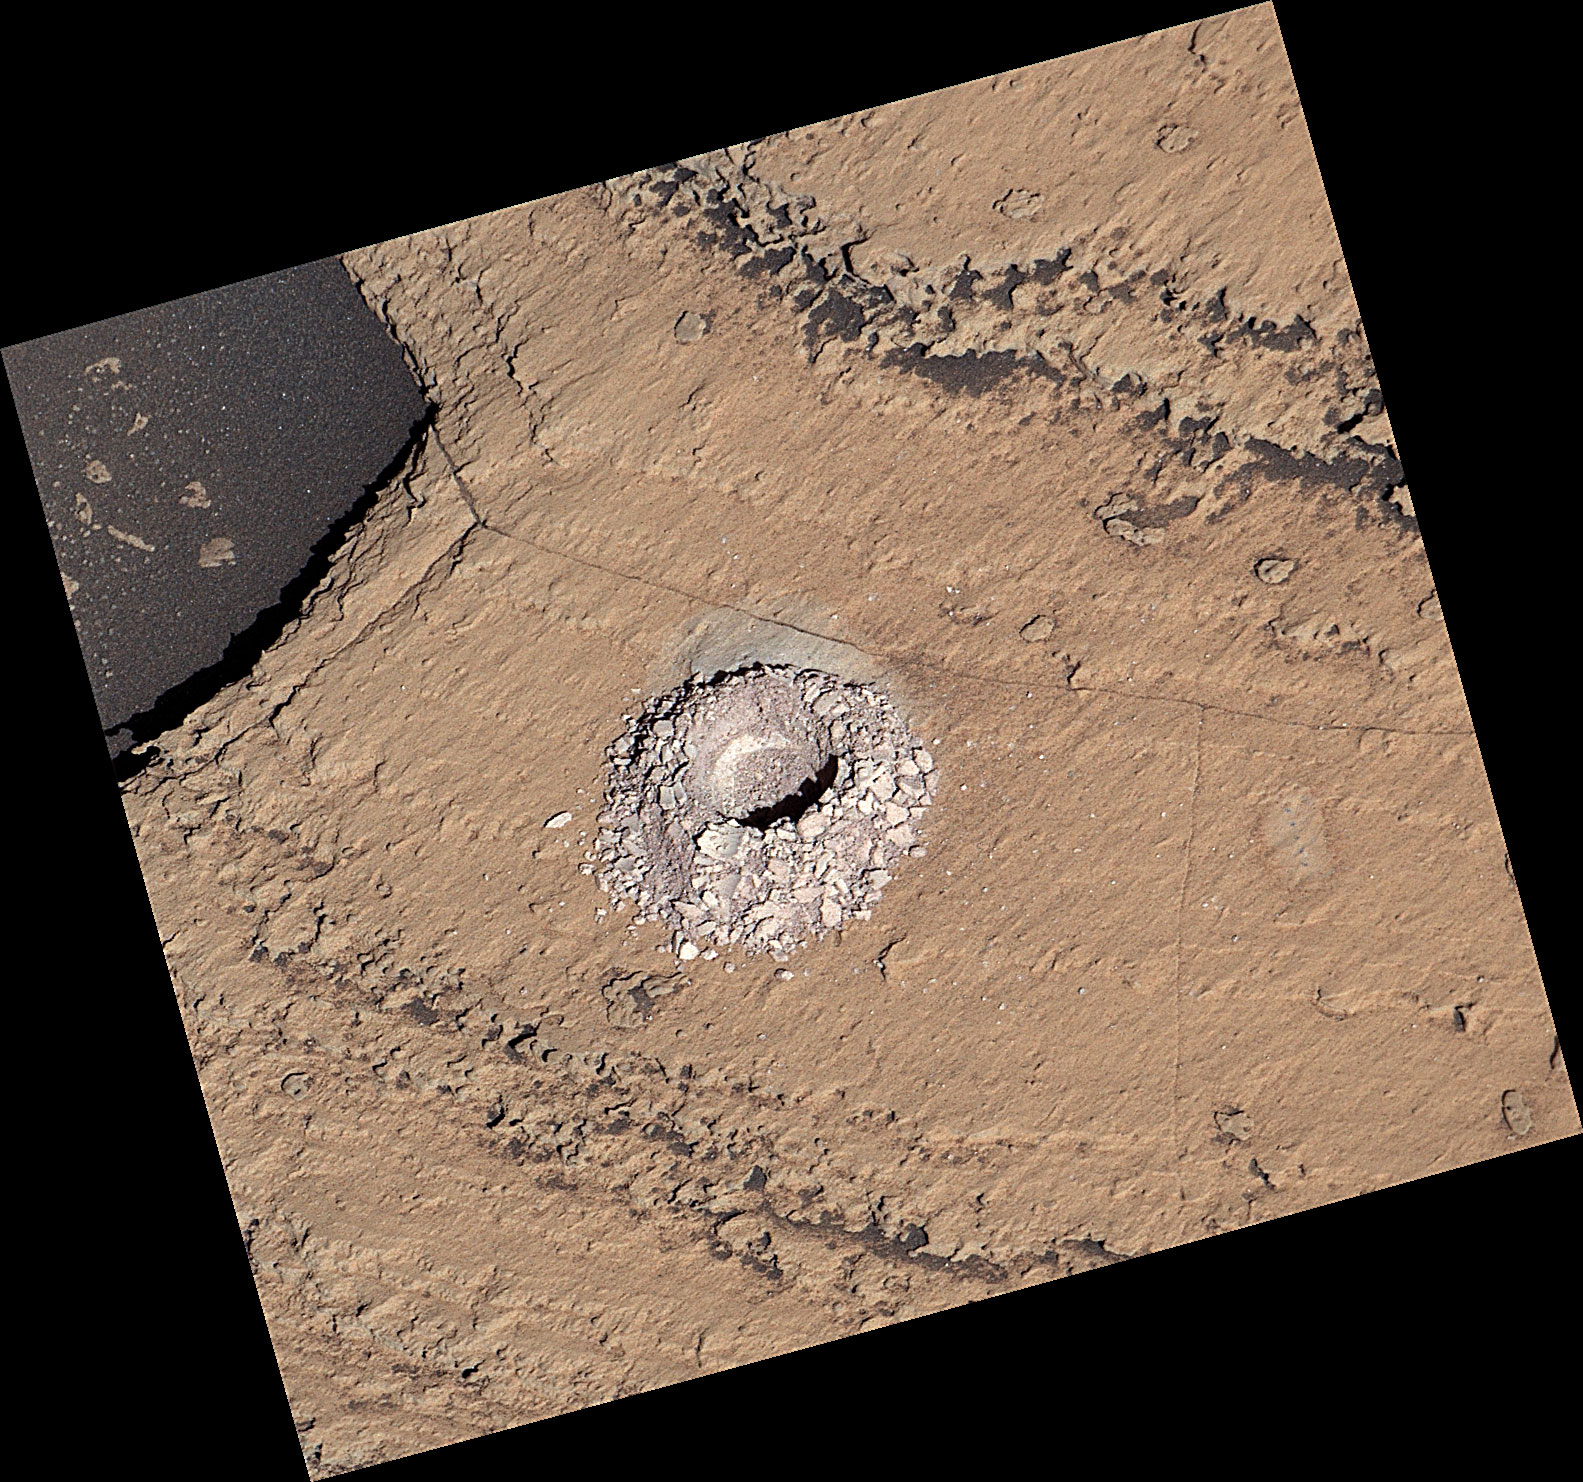 NASA’s Curiosity Mars rover used the drill on the end of its robotic arm to collect a sample from a rock nicknamed “Sequoia” on Oct. 17, 2023, the 3,980th Martian day, or sol, of the mission. 